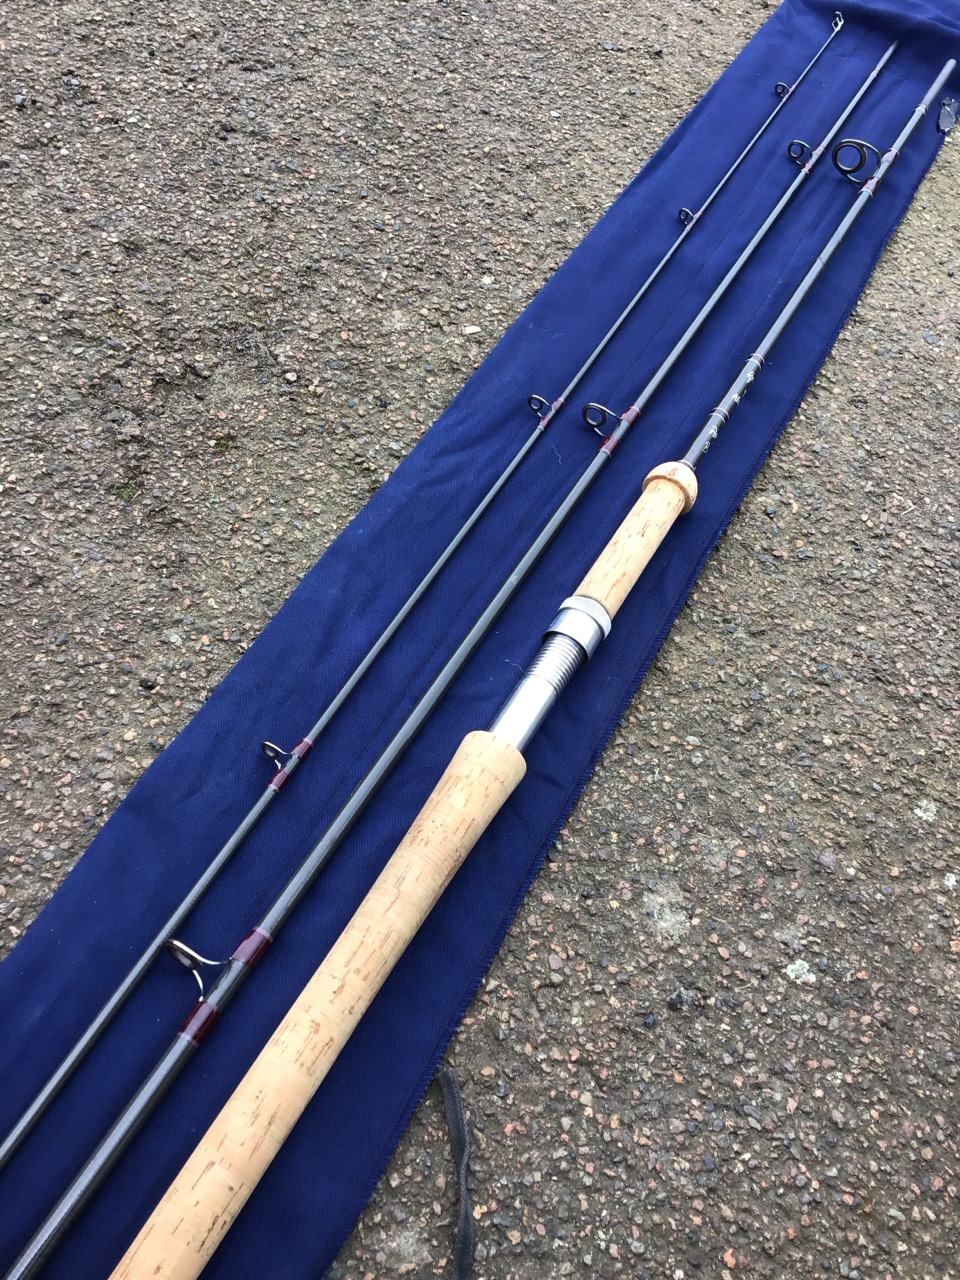 A Greys of Alnwick carbon fibre 12ft Royal Bait three-piece spinning rod with sleeve. - Image 3 of 3